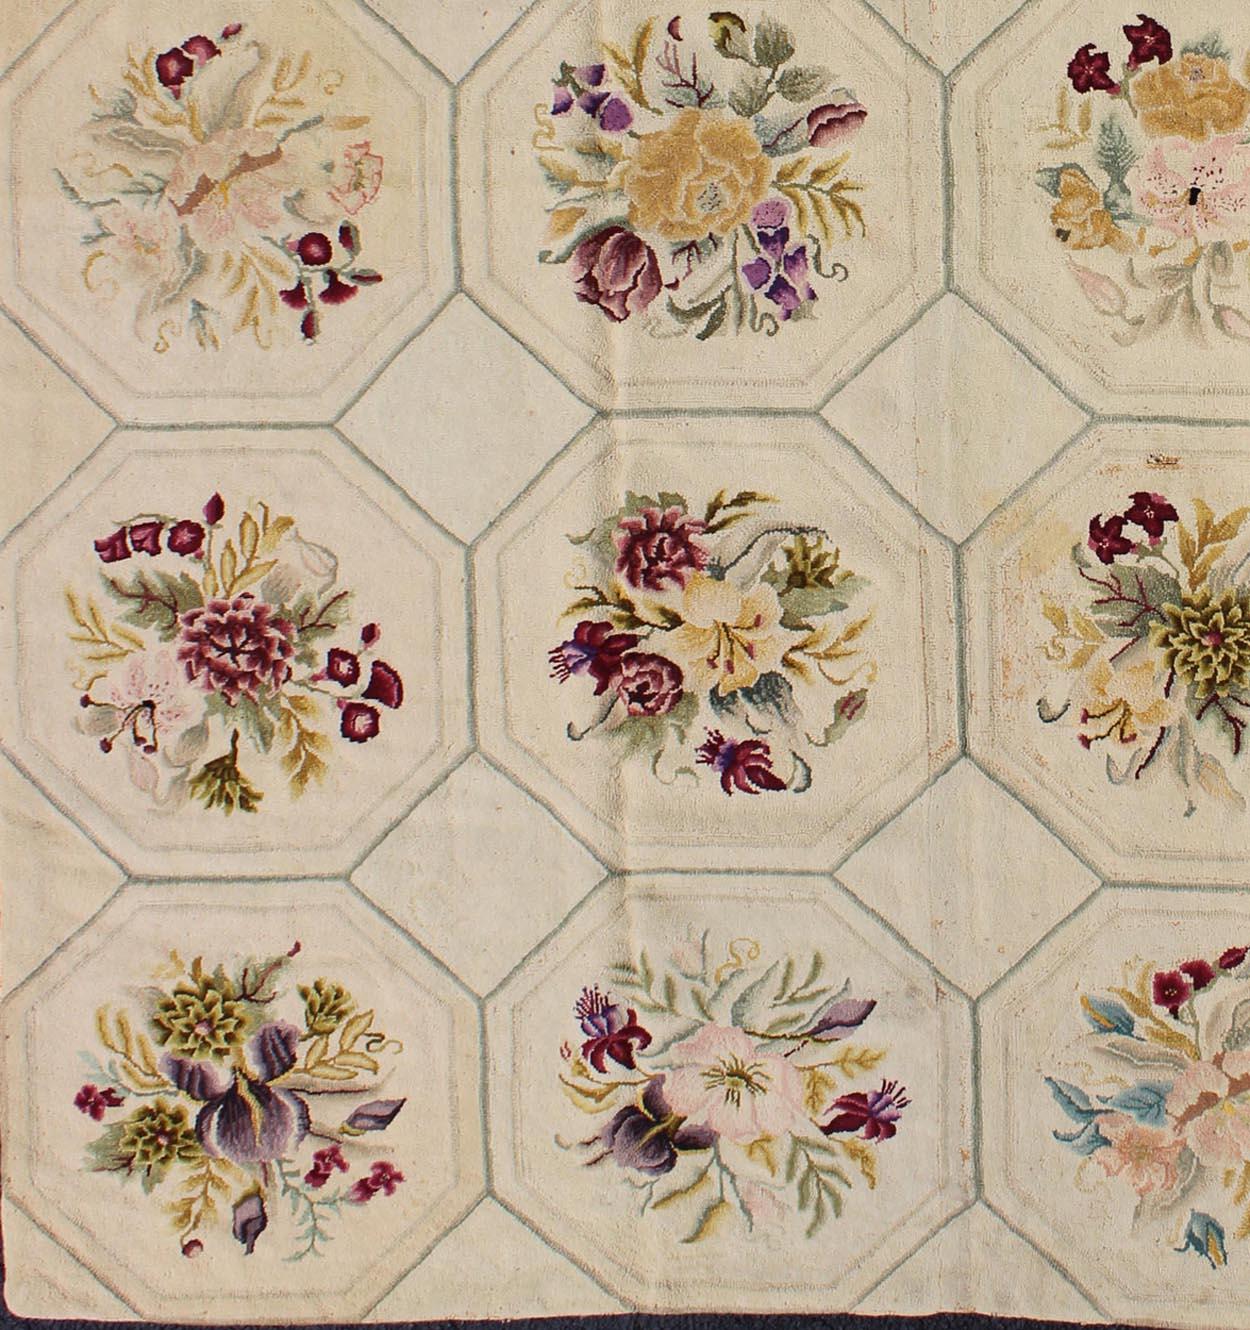 American Hooked Rug with Basket-Weave Pattern and Flowers. Rug/G-1002.  Ingenious in style, color and composition, the features in this spectacular, antique American hooked rug create an illusion of depth and texture. The beautiful basket-weave